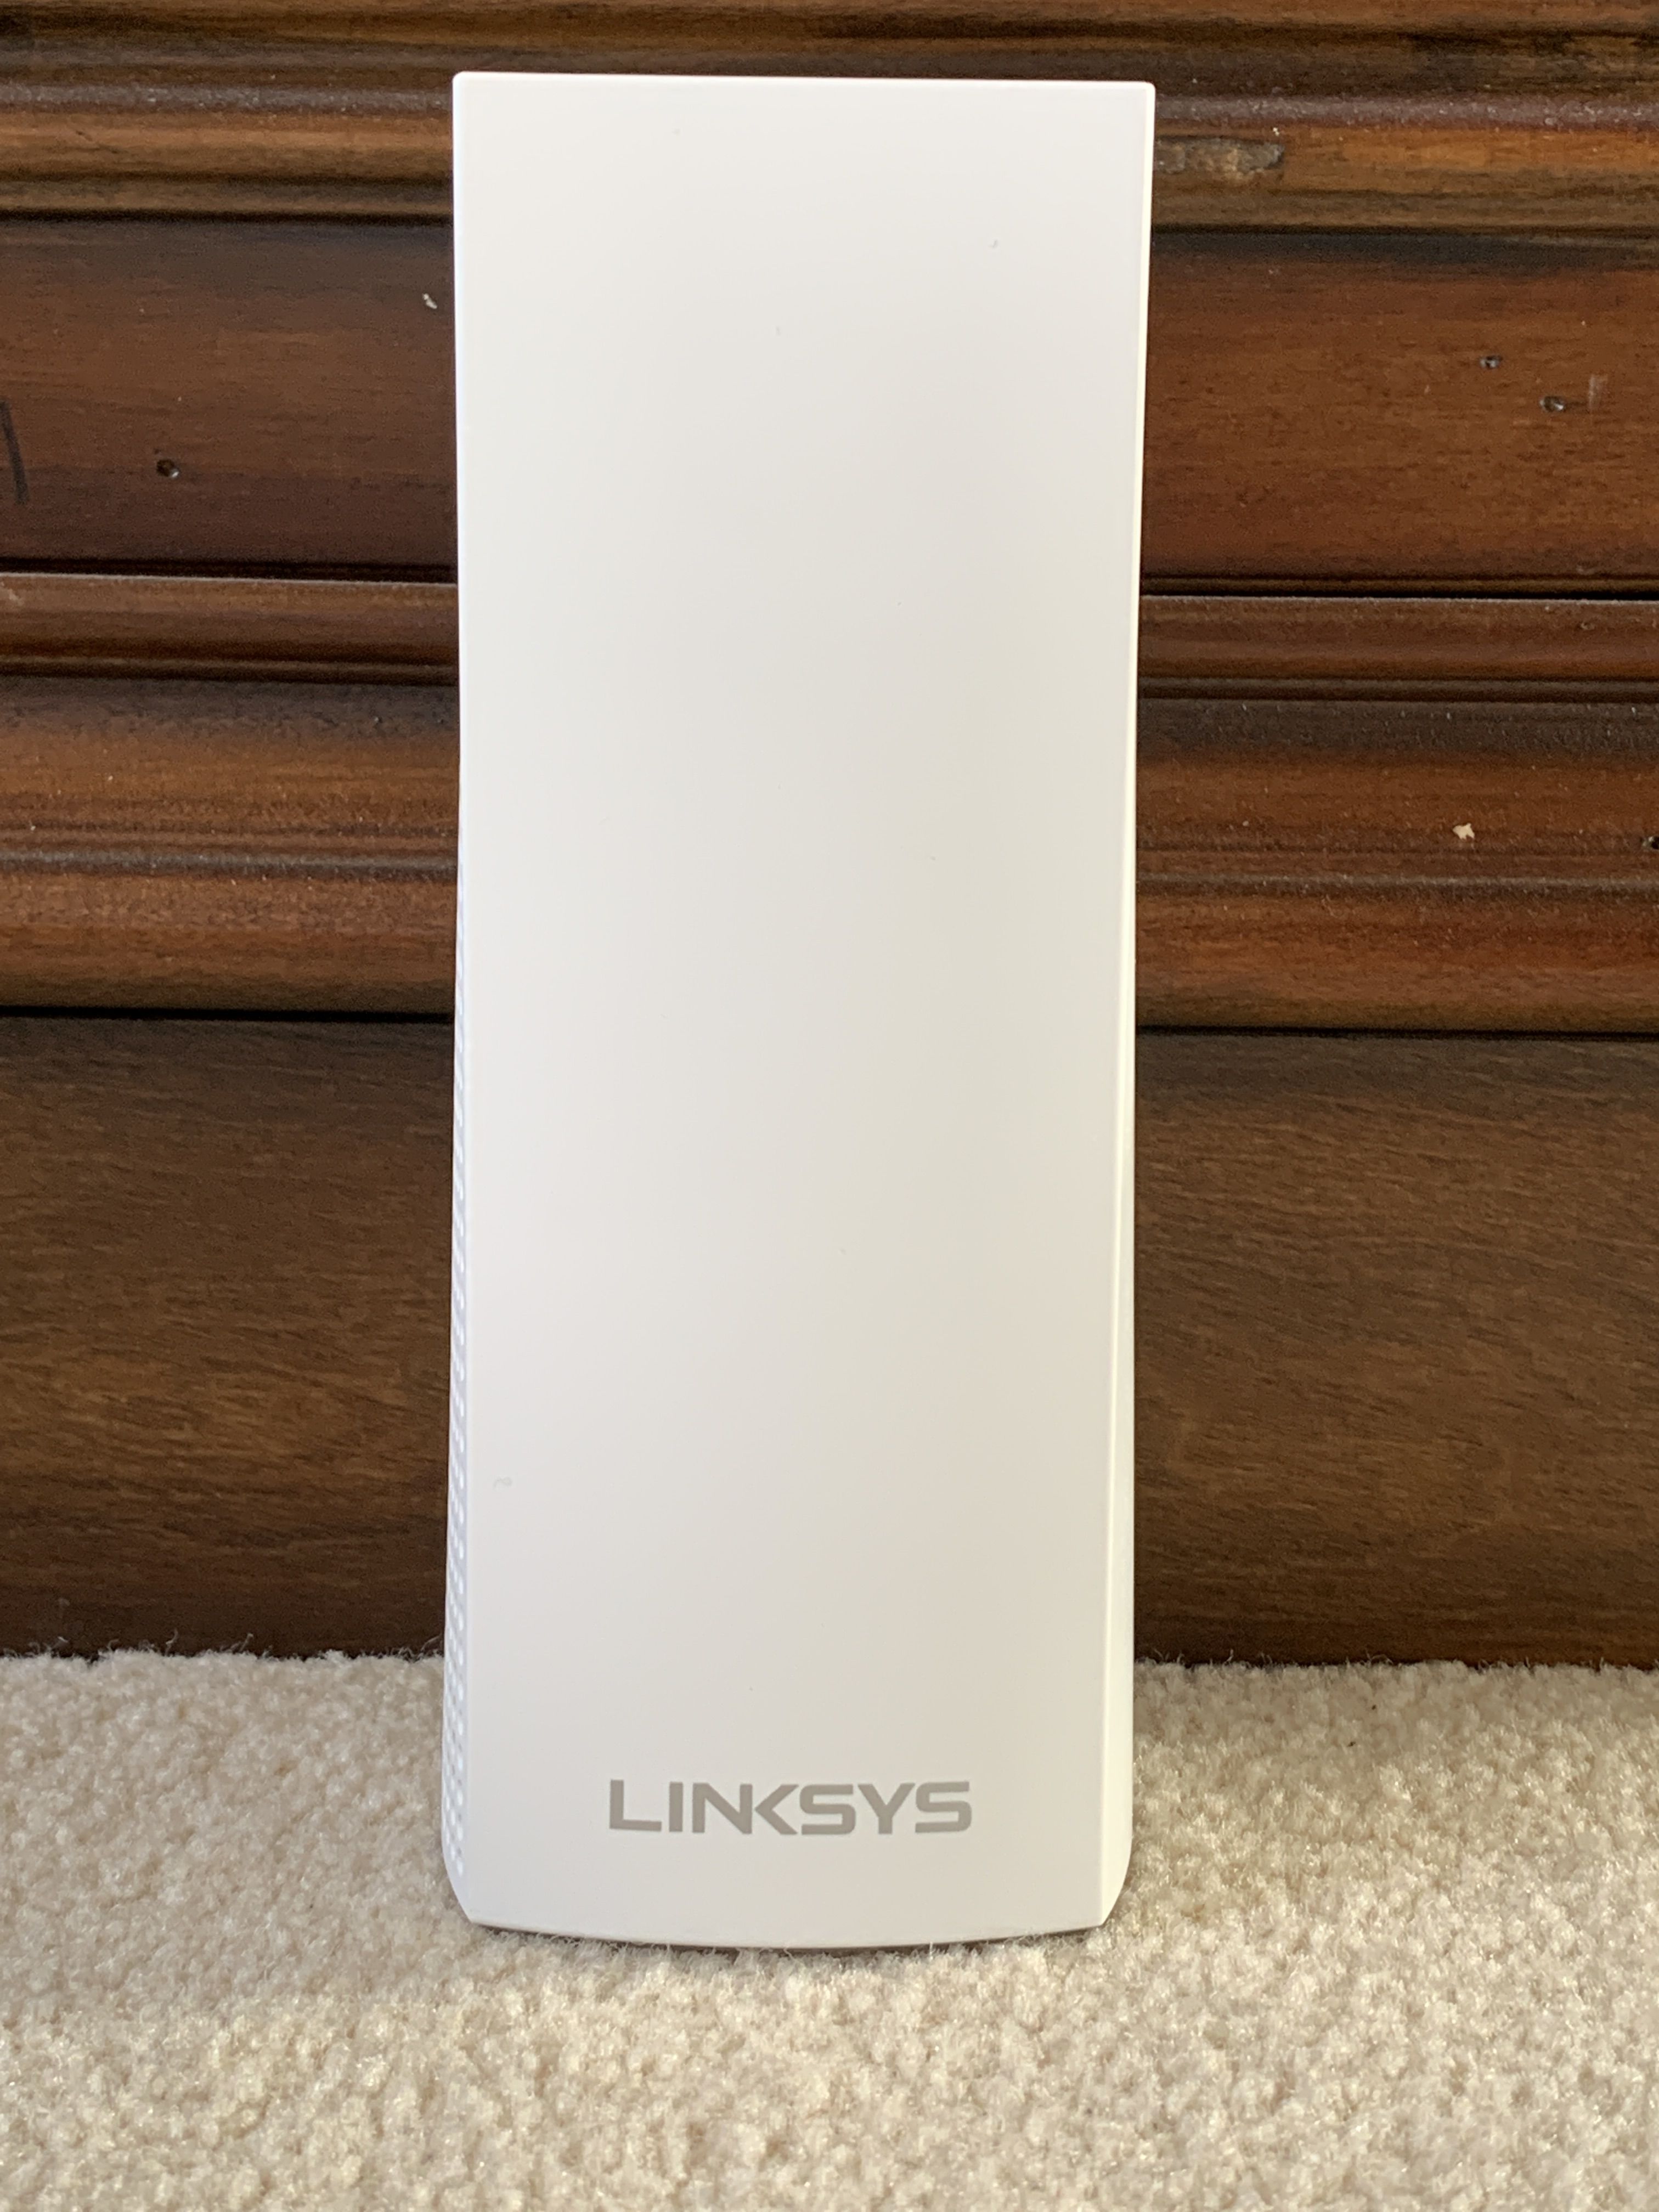 Linksys Velop Intelligent Mesh WiFi System, Tri-Band WiFi Routers. Buy Between 1 through 5 Routers